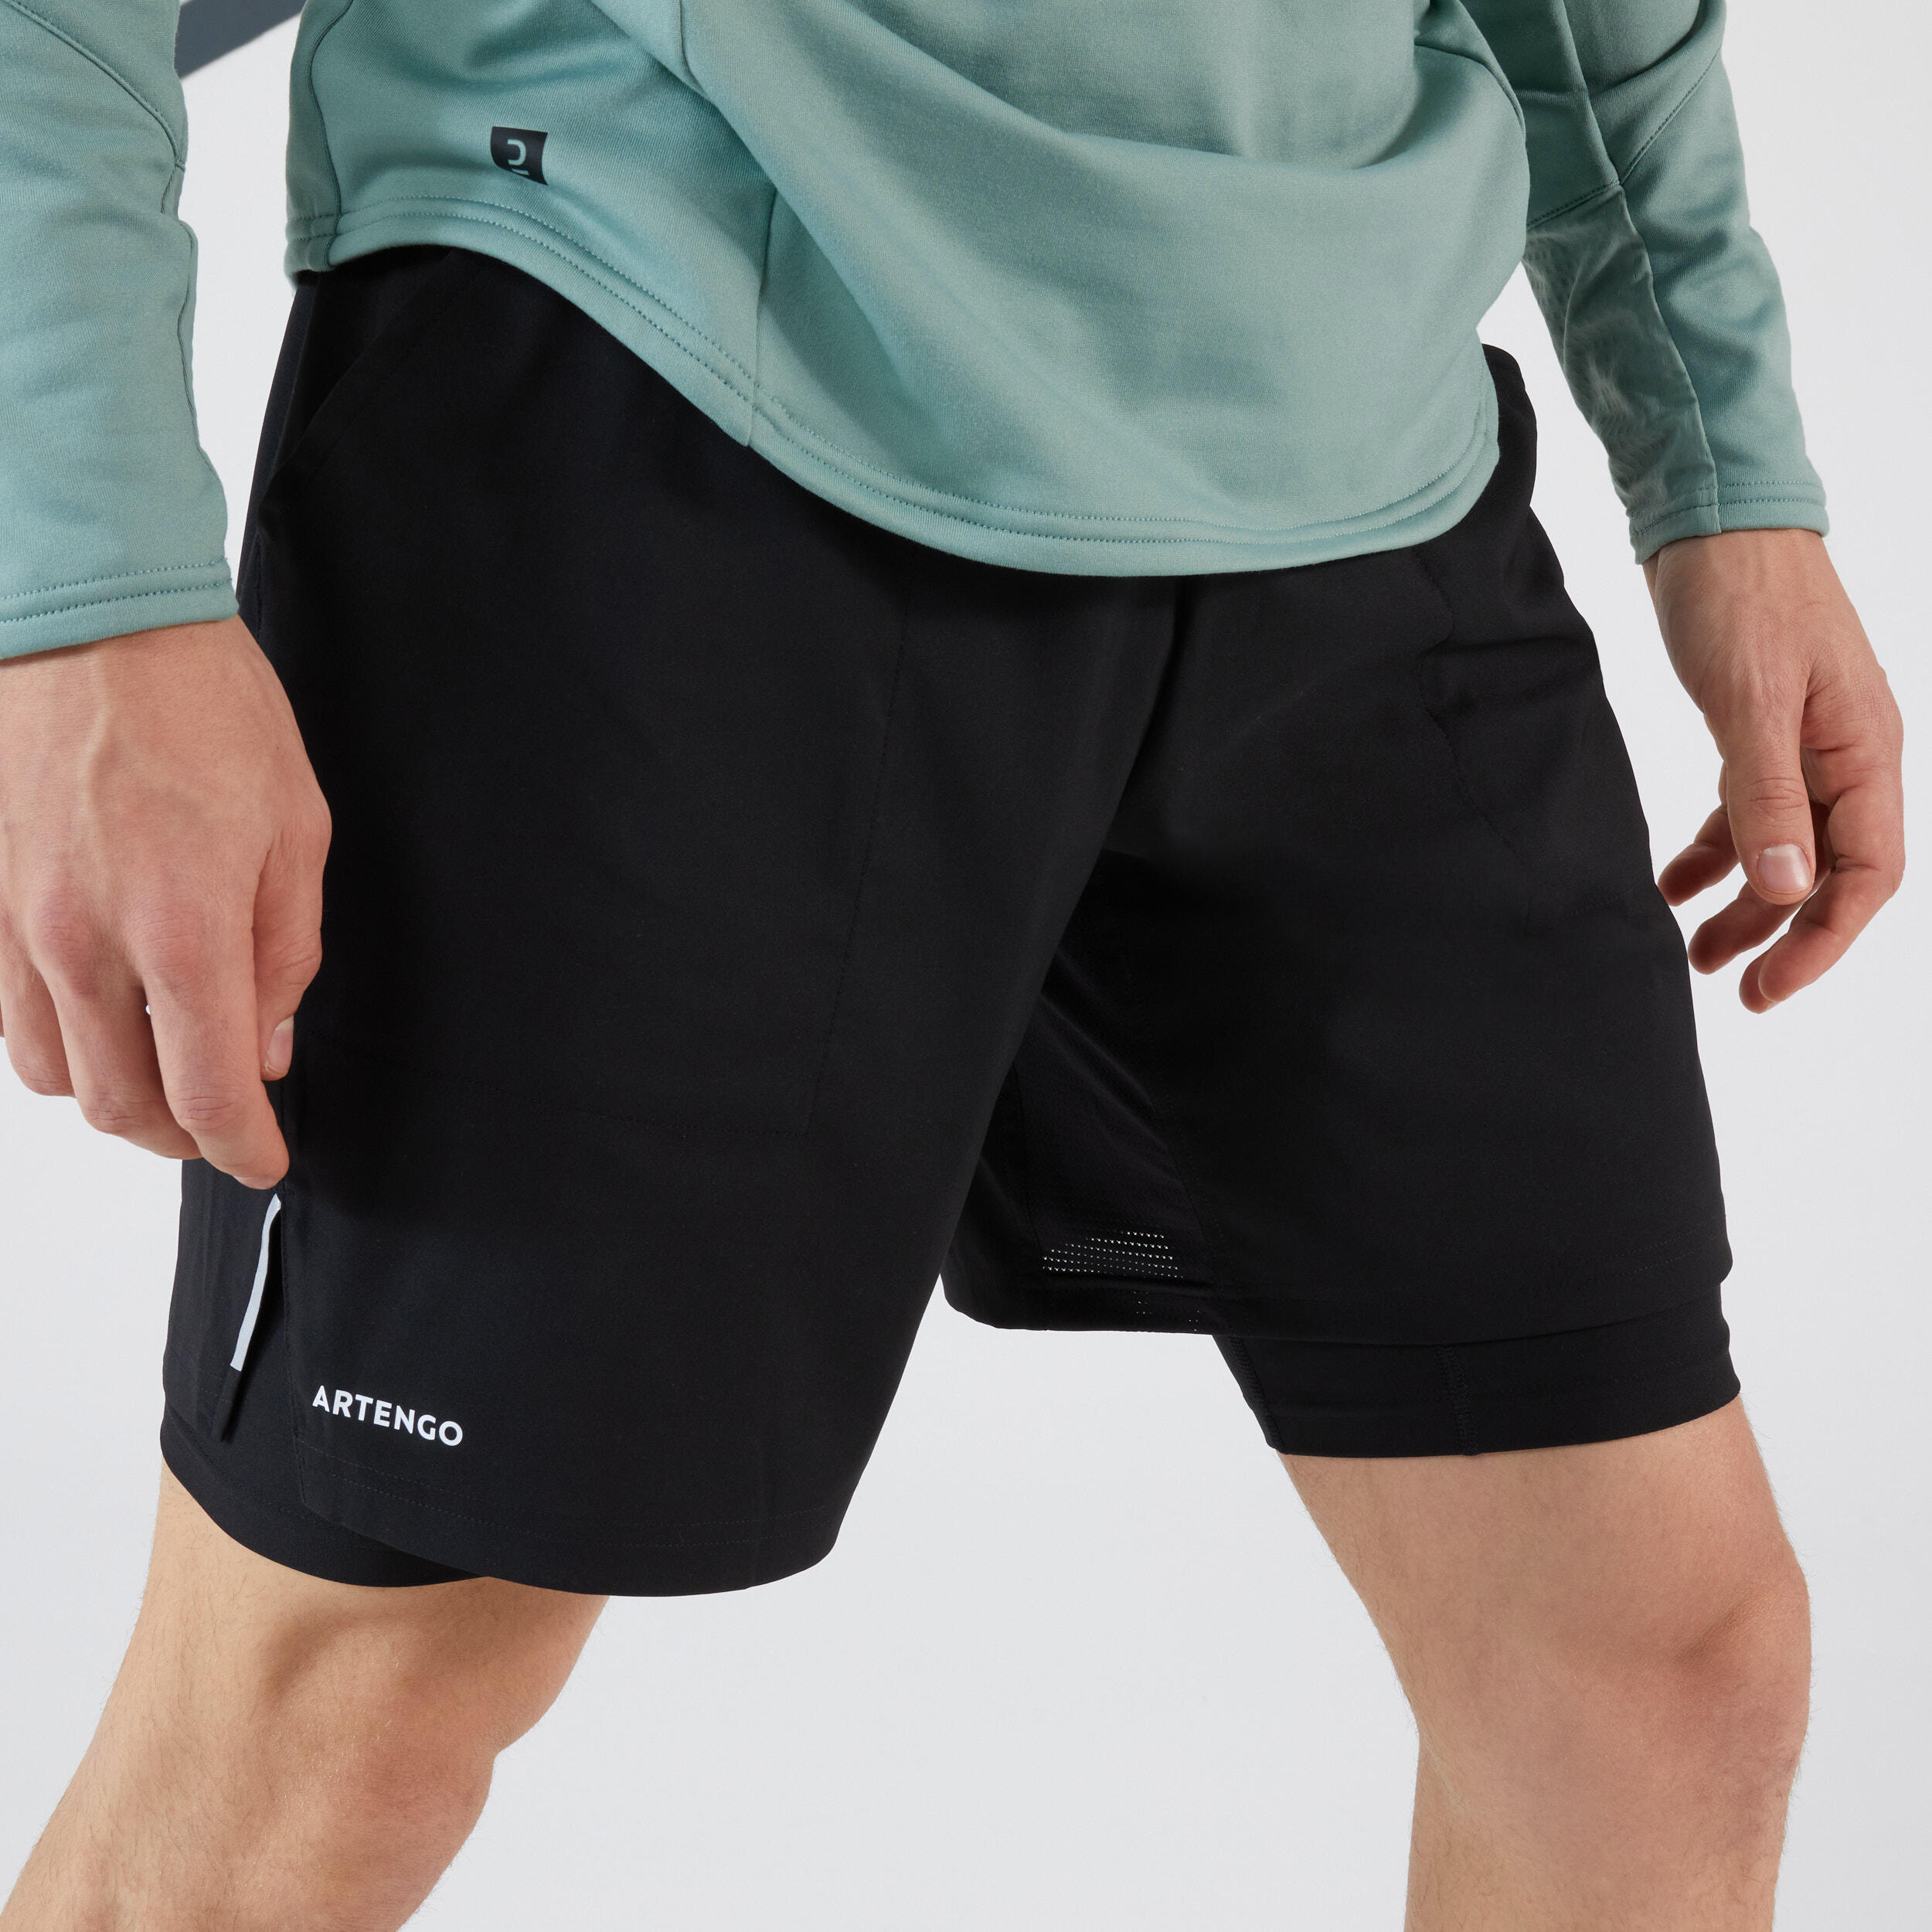 Men's Tennis 2-in-1 Shorts and Undershorts Thermic - Black/Black 4/8